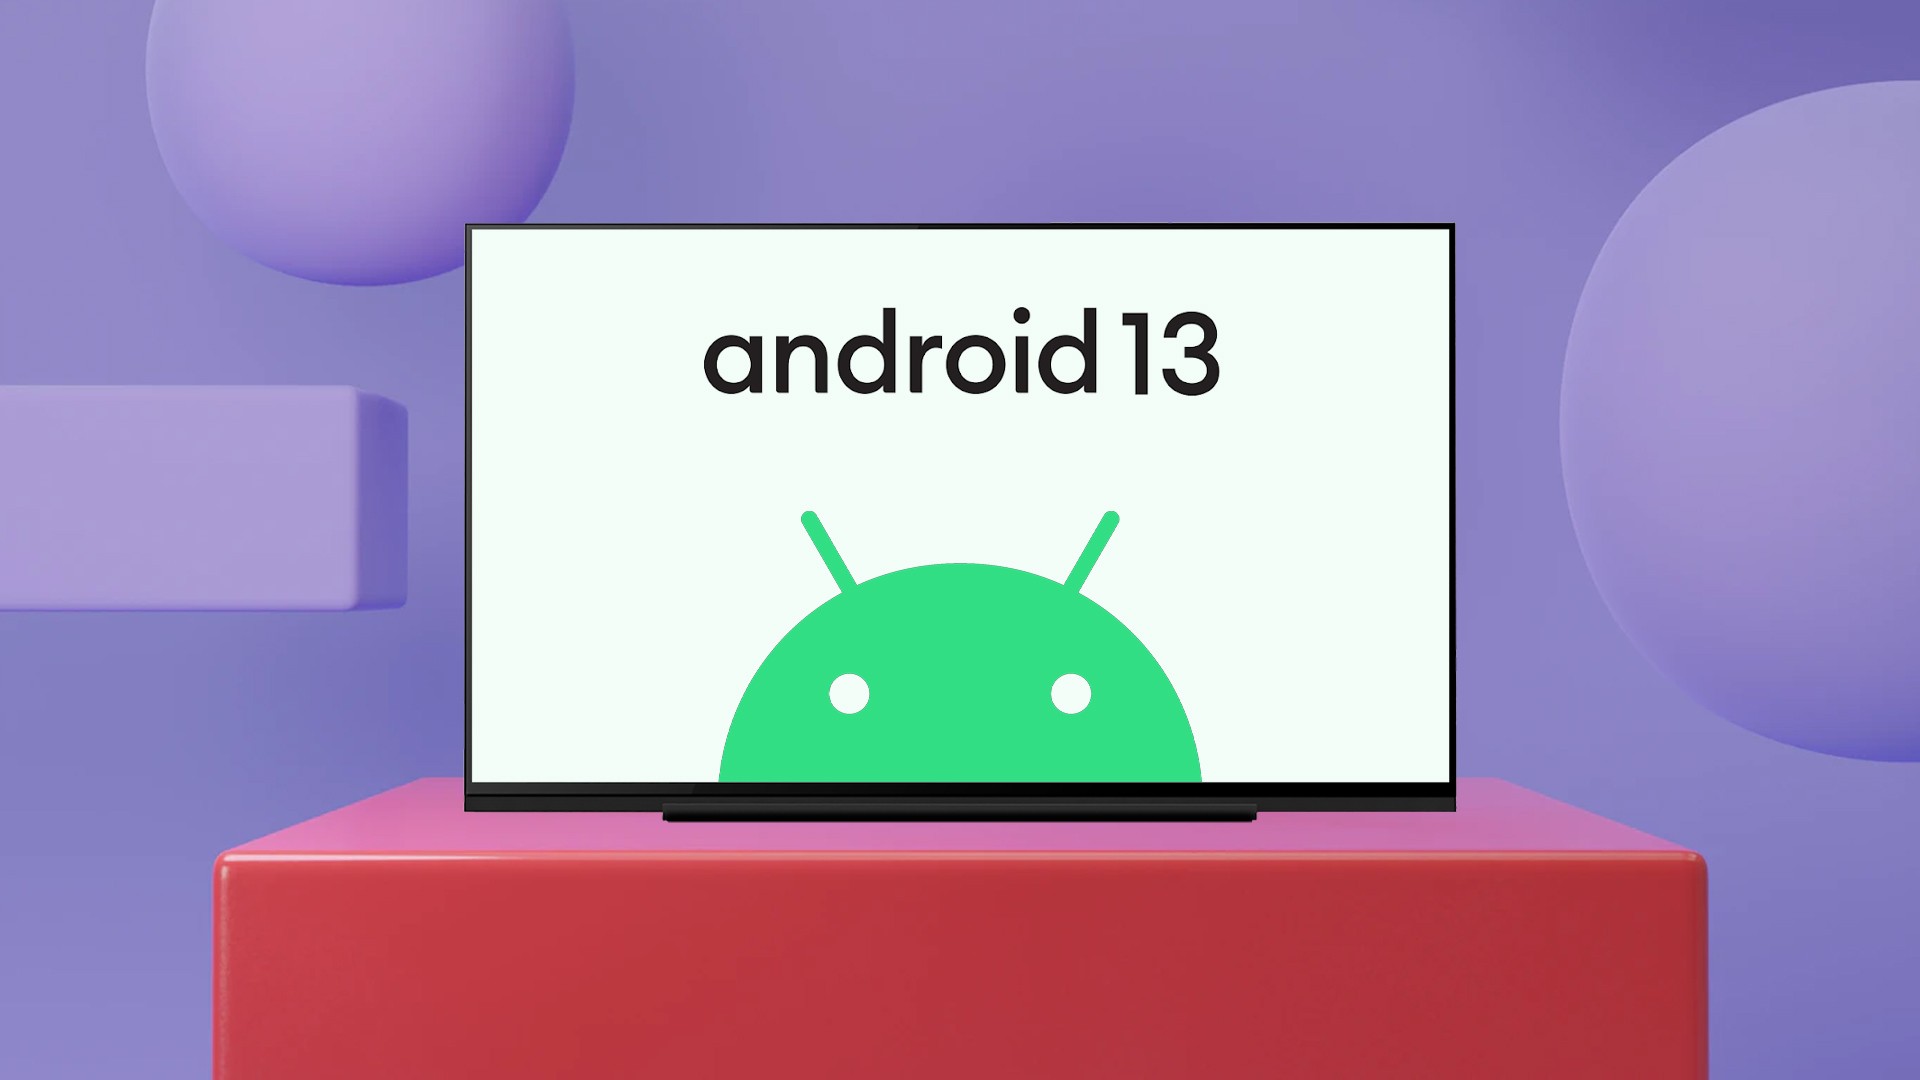 Android TV 13 is released by Google with new customization and accessibility features
